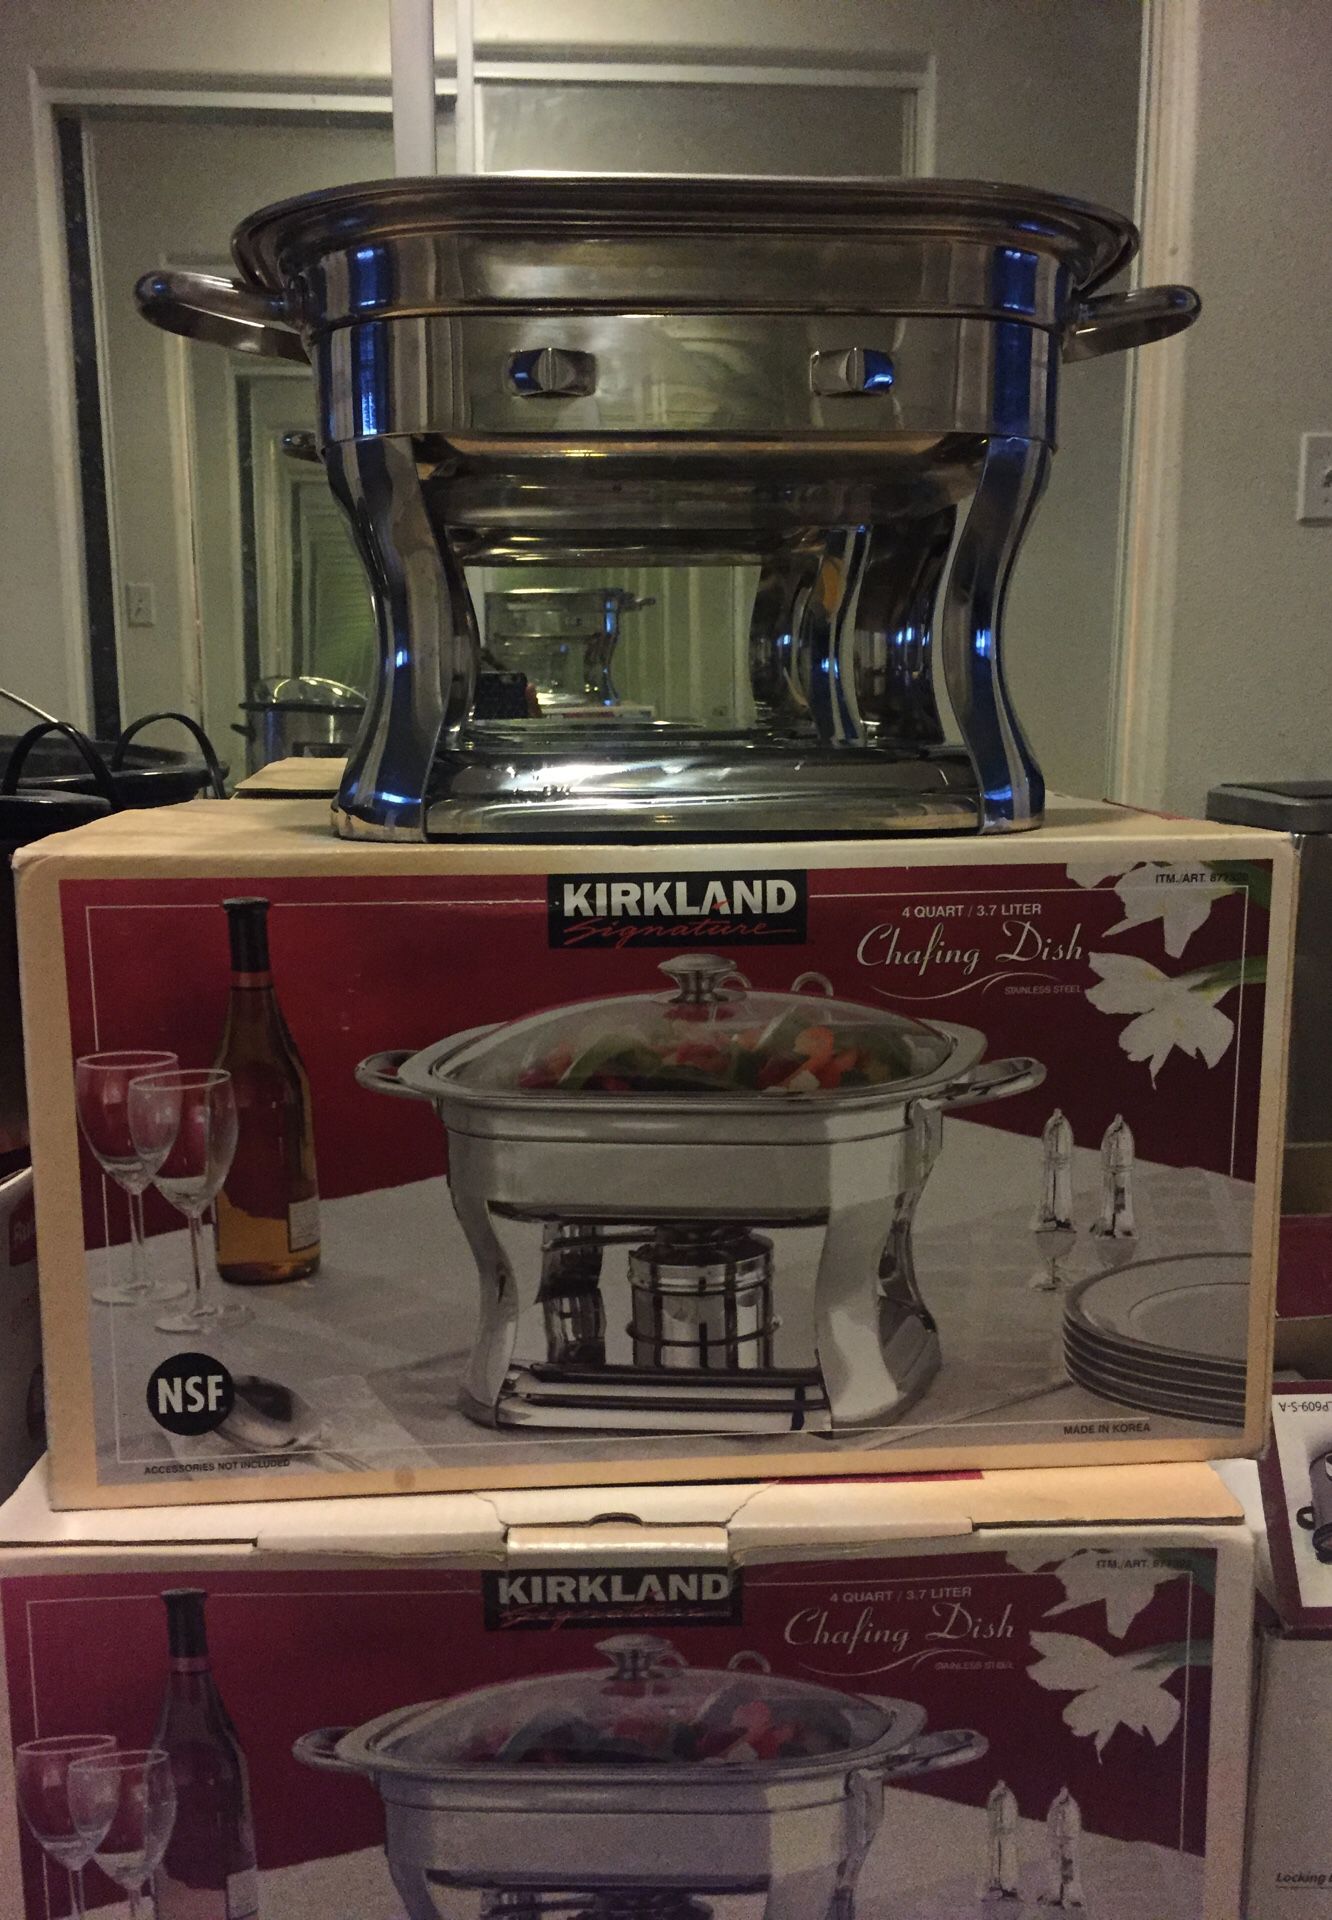 5 New stainless steel Kirkland Chafing Dish